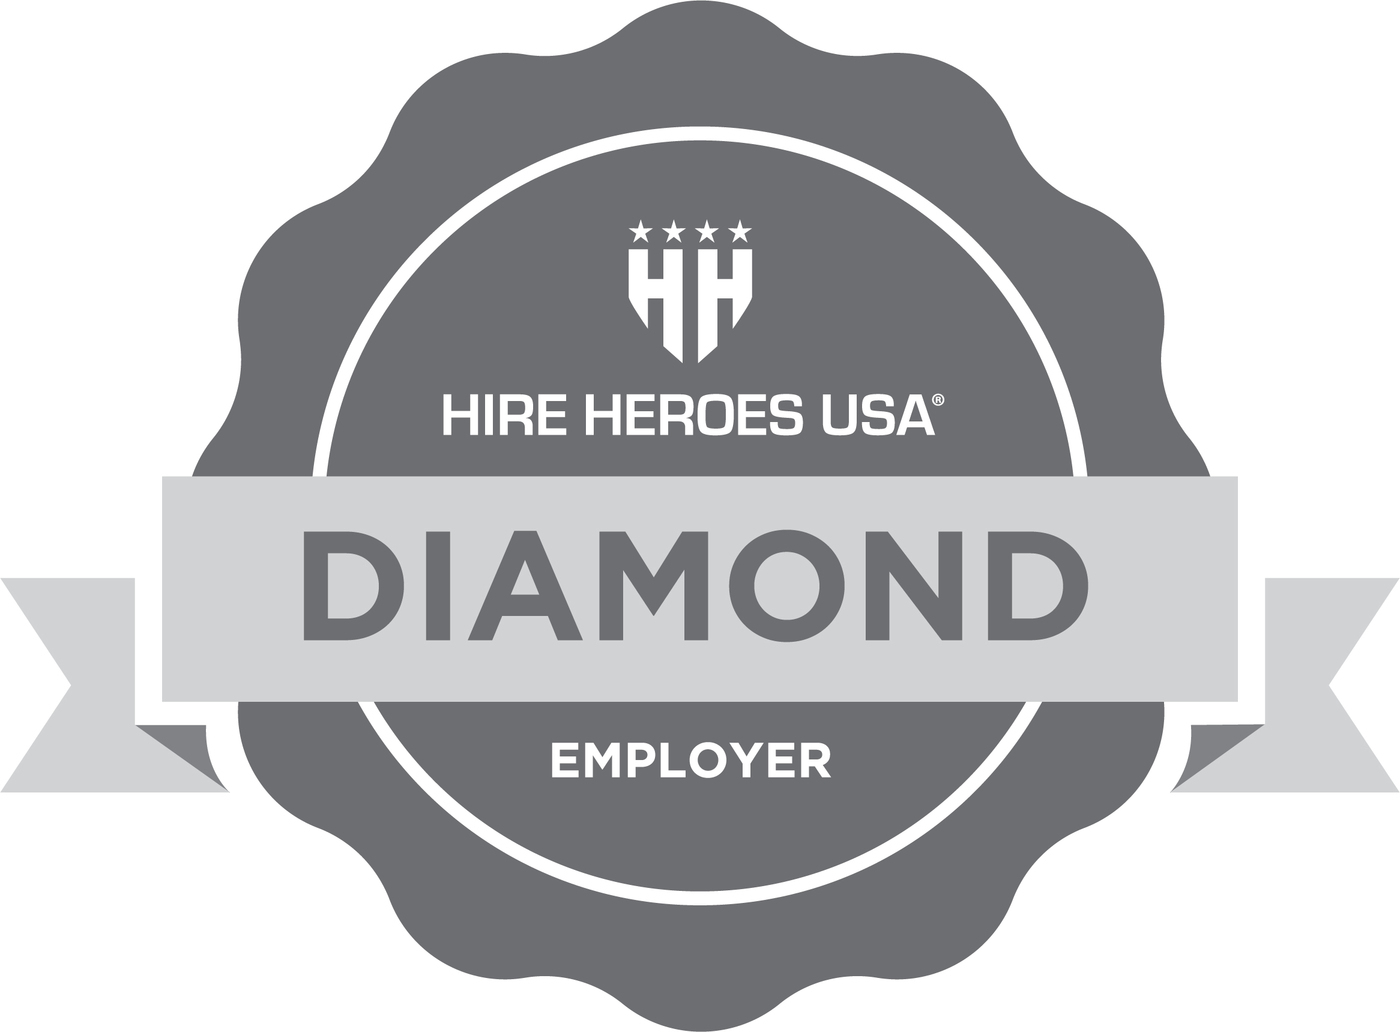 A Special Thanks to Our Diamond Employment Partners